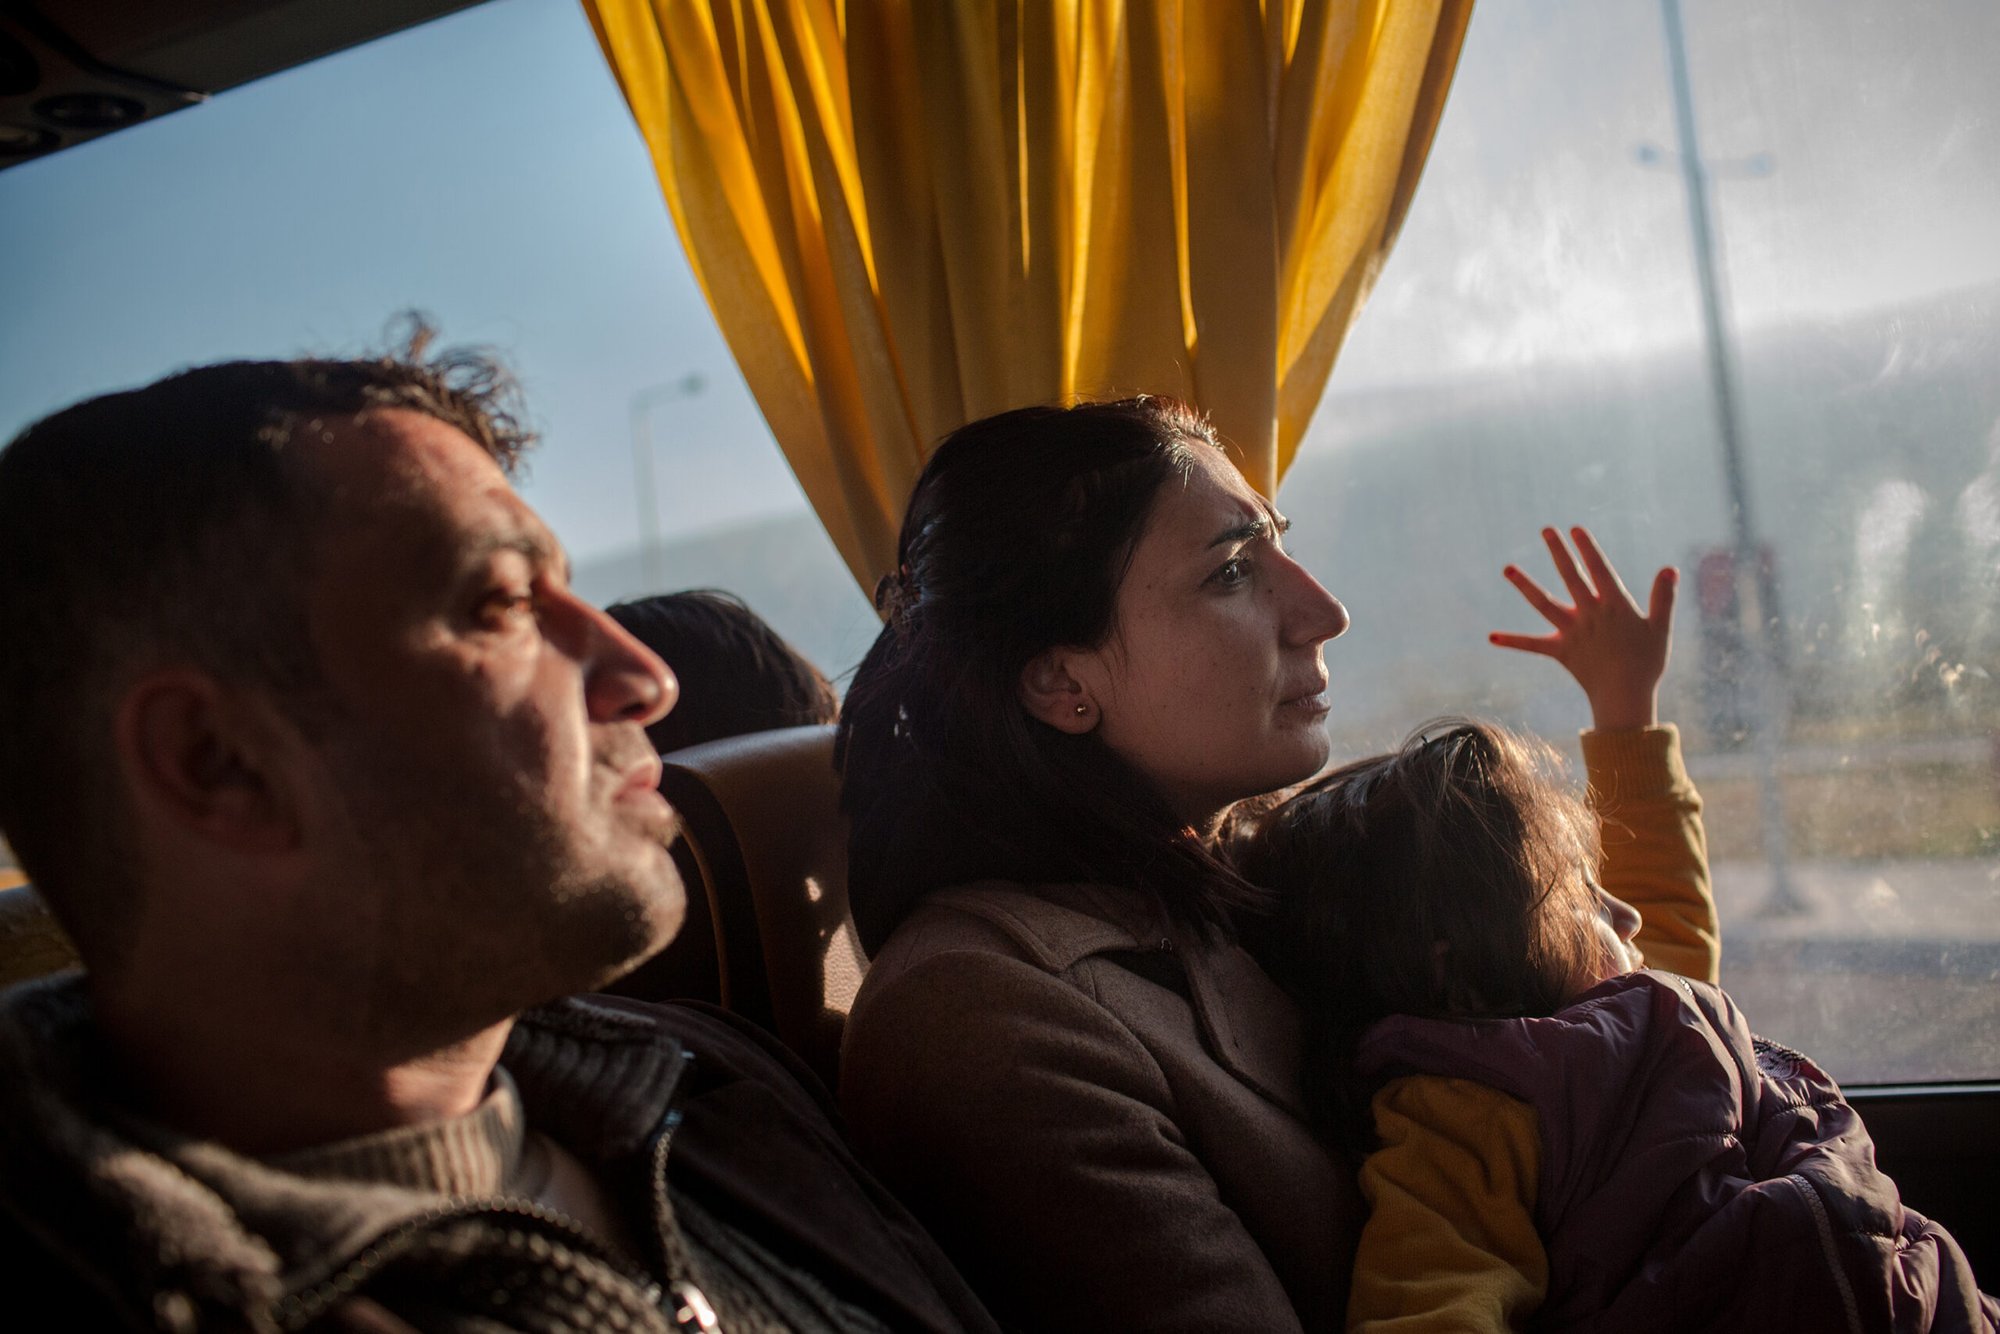 Syrian refugee family on a bus from Athens to Greek-Macedonian border.